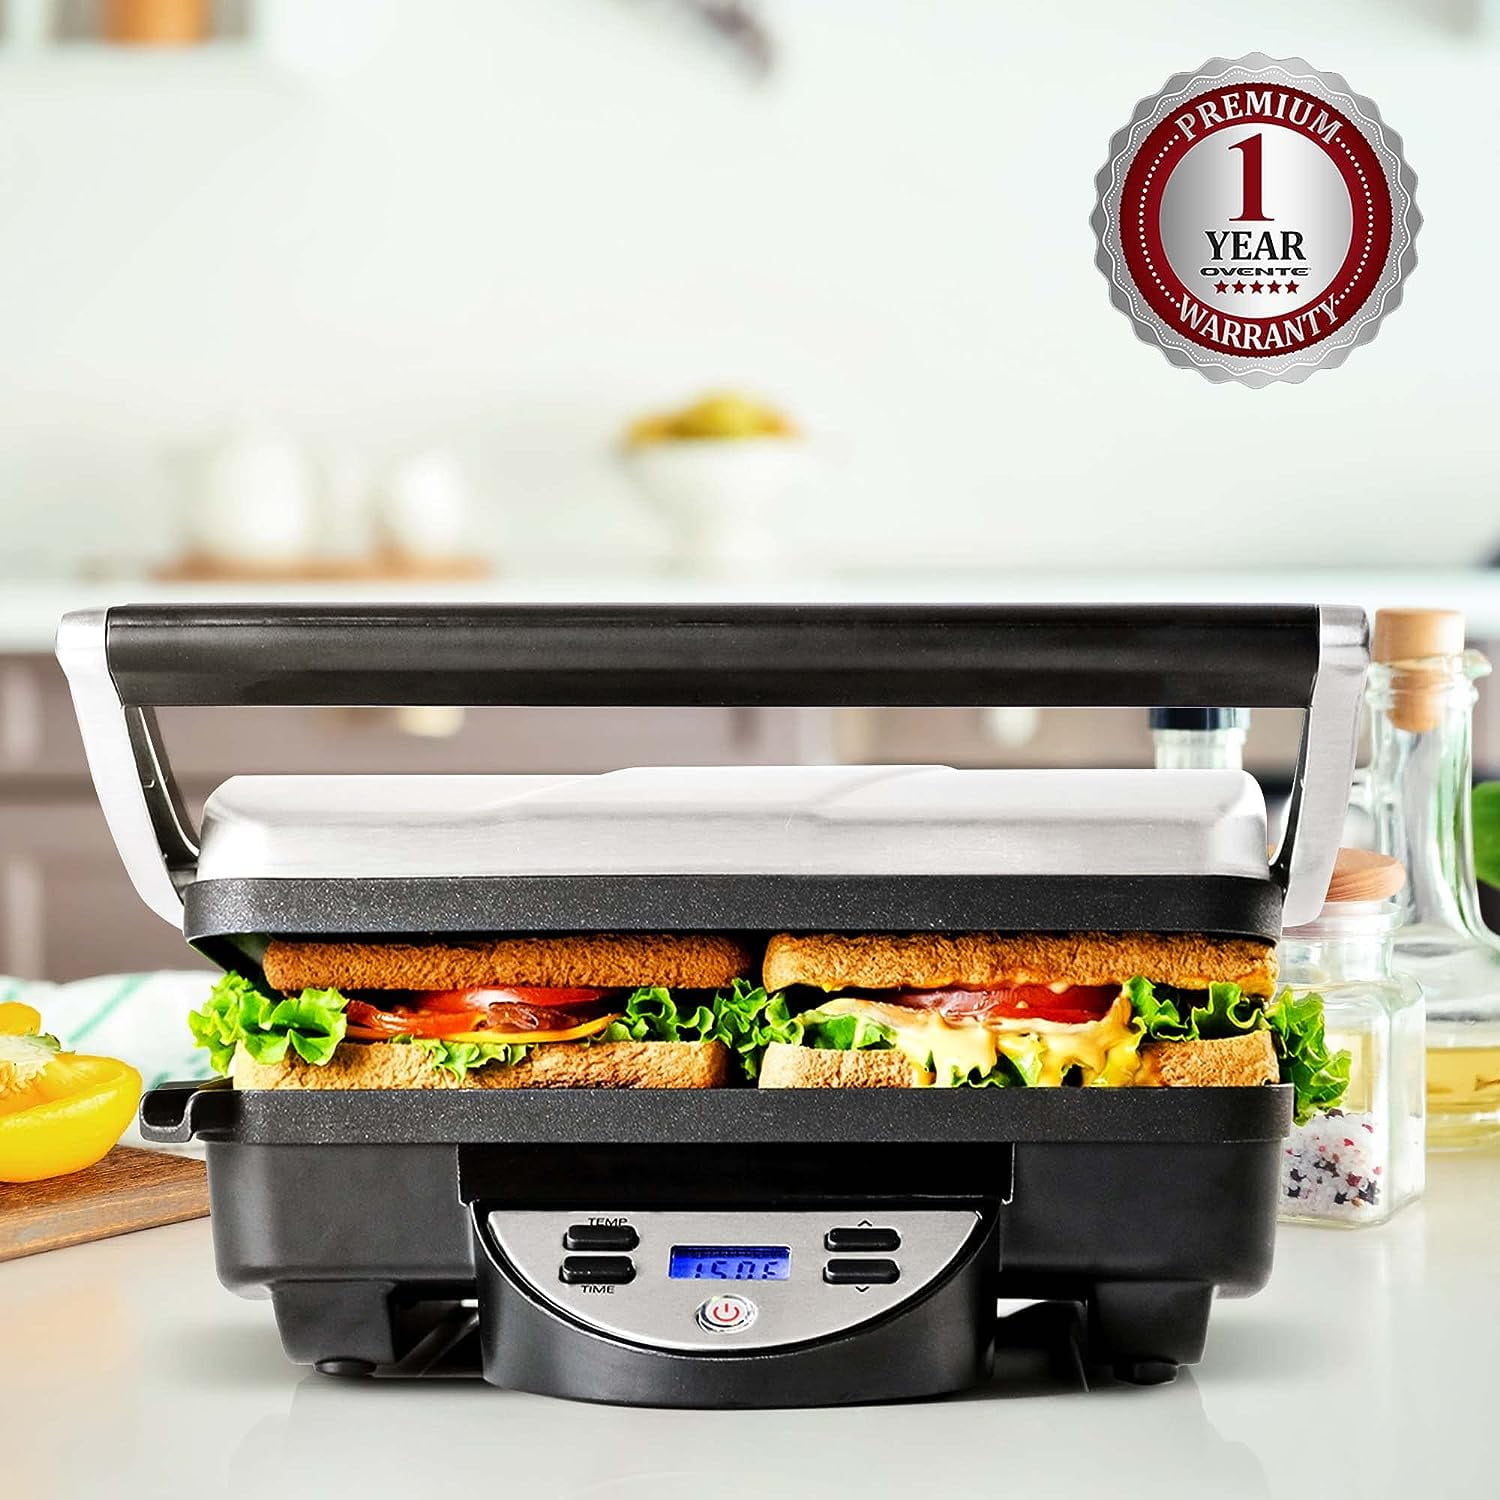 Ovente Electric Indoor Panini Press Grill with Non-Stick Double Flat  Cooking Plate Countertop Sandwich Make Silver GP0620BR